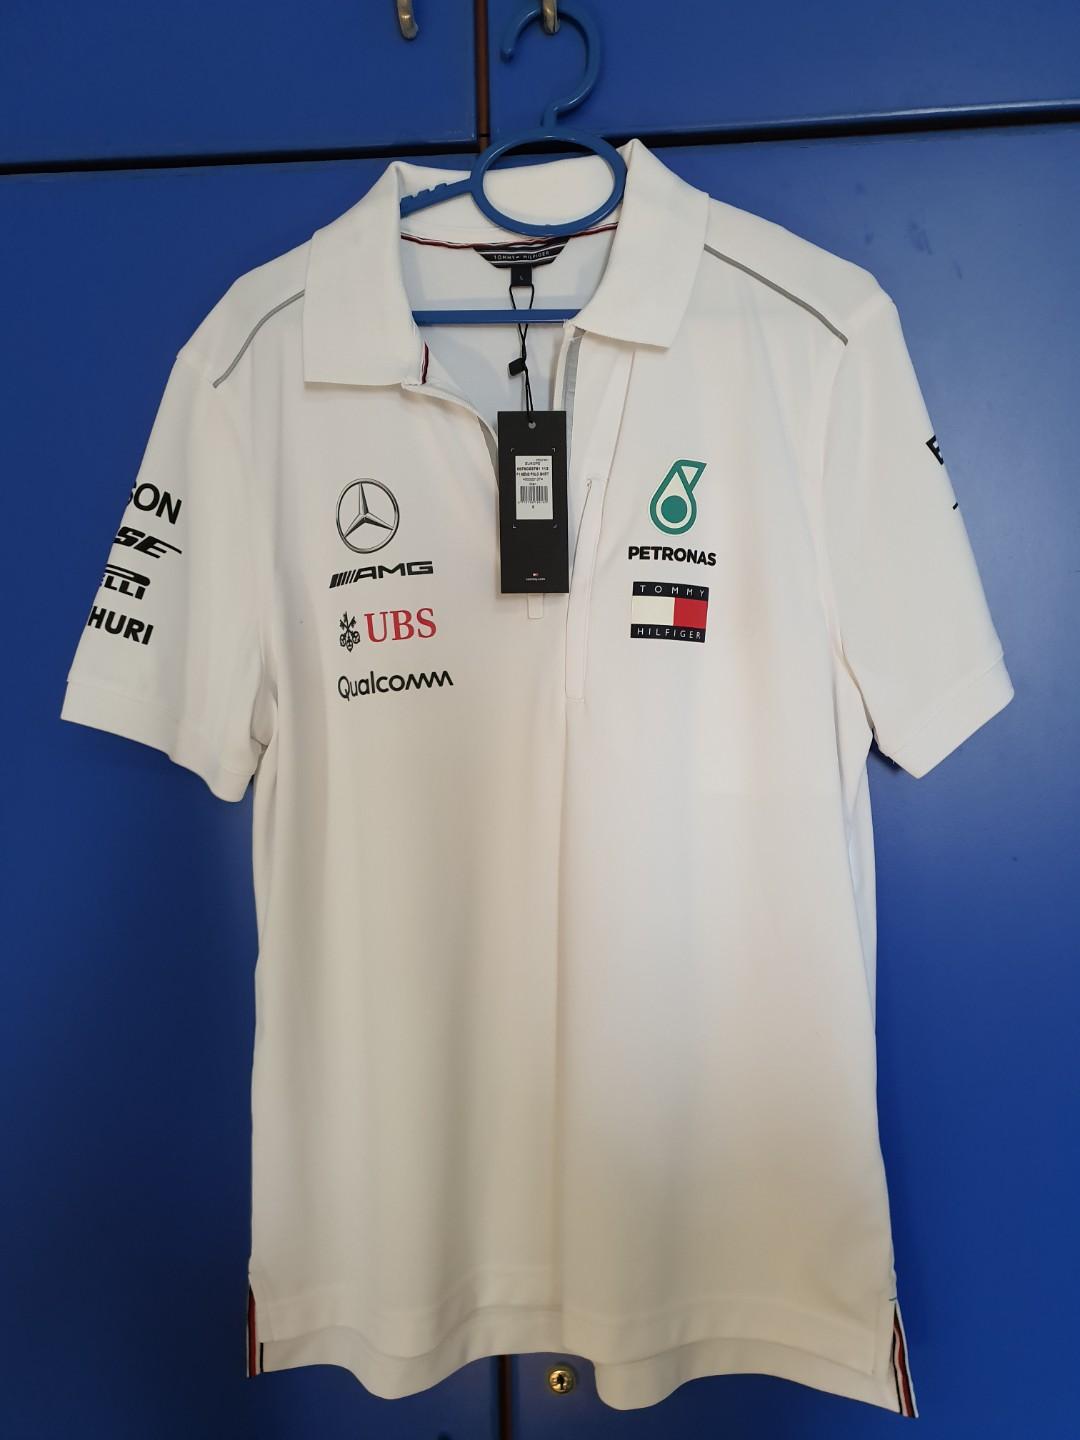 tommy hilfiger mercedes polo